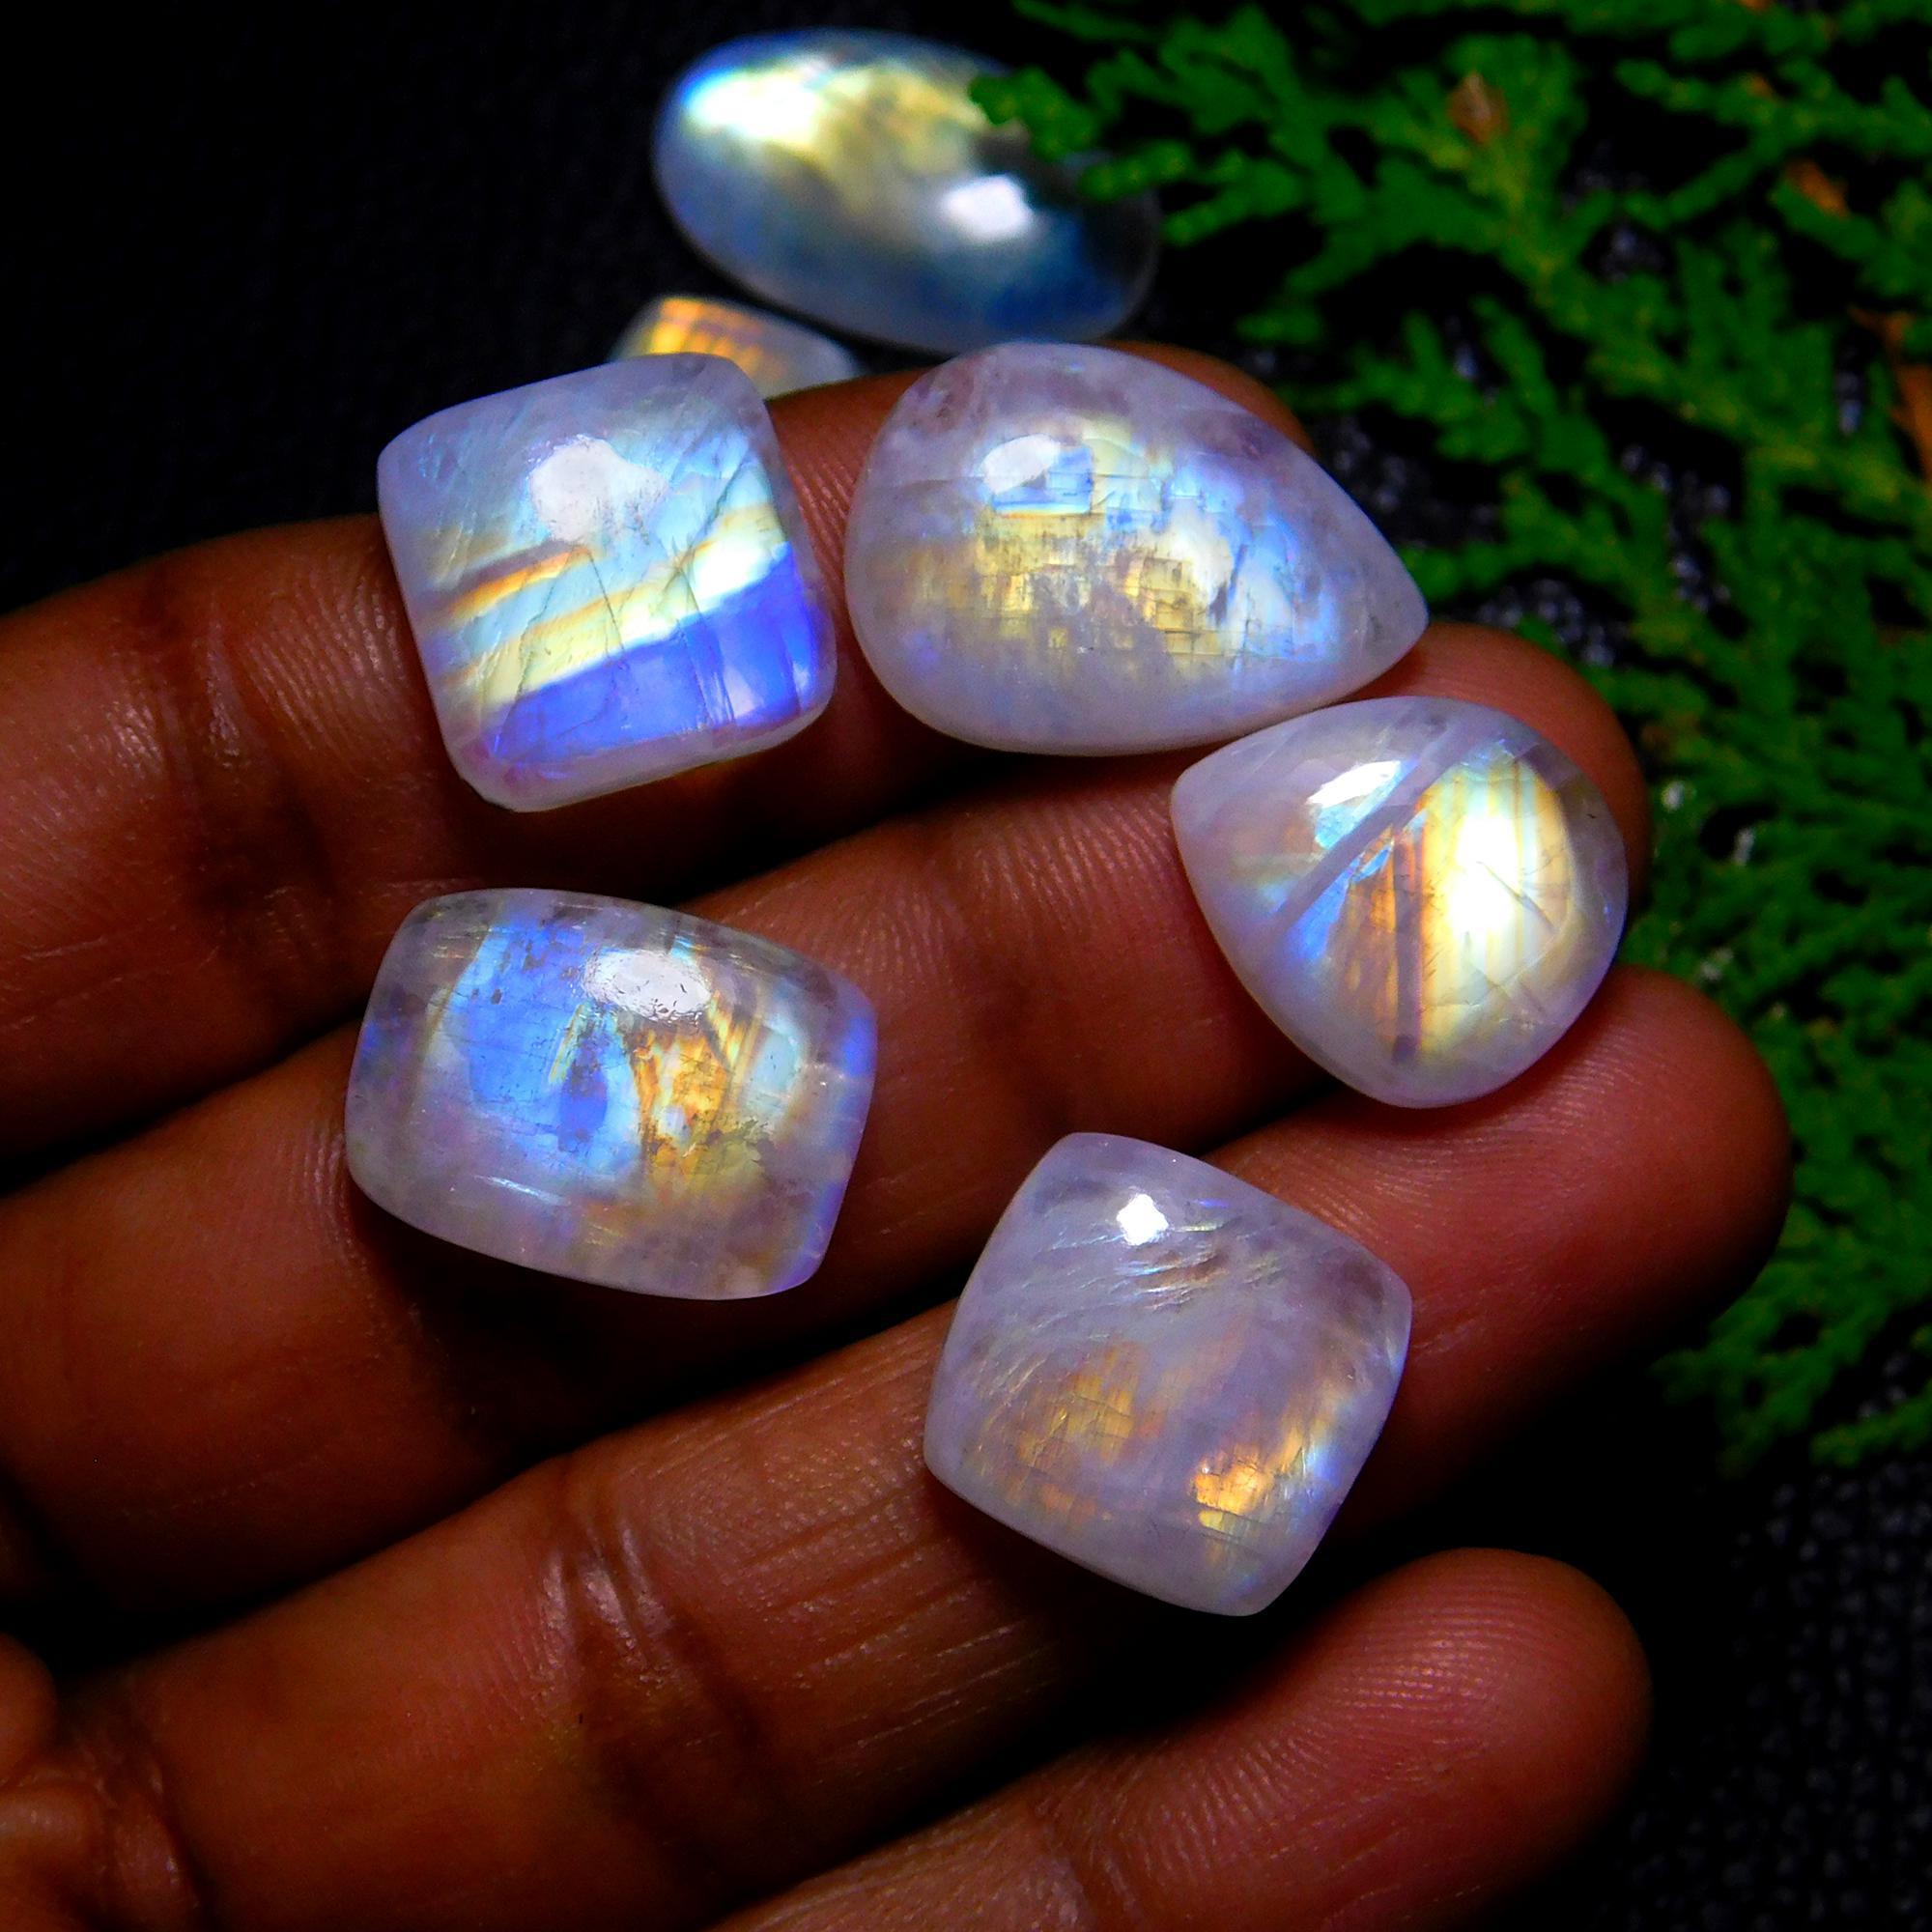 8Pcs 94Cts Natural Rainbow Moonstone Cabochon Blue Fire Loose Gemstone Crystal jewelry supplies wholesale lot gift for her Black Friday 24X14 14X12mm#9411